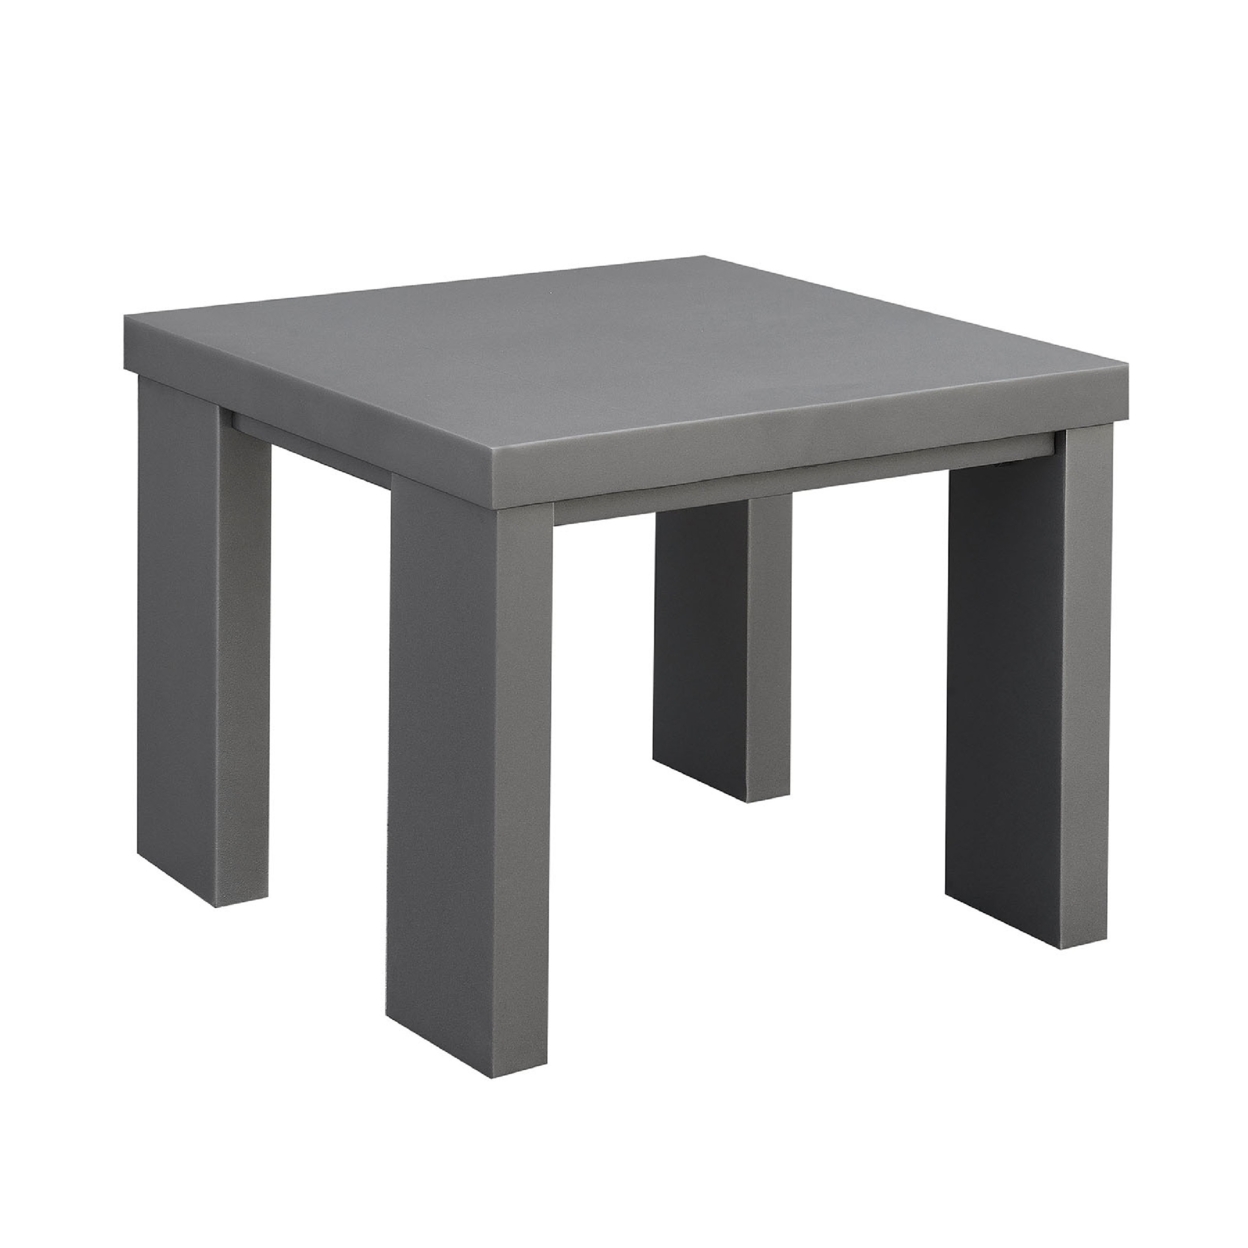 Aluminum Framed End Table With Plank Style Top, Gray- Saltoro Sherpi